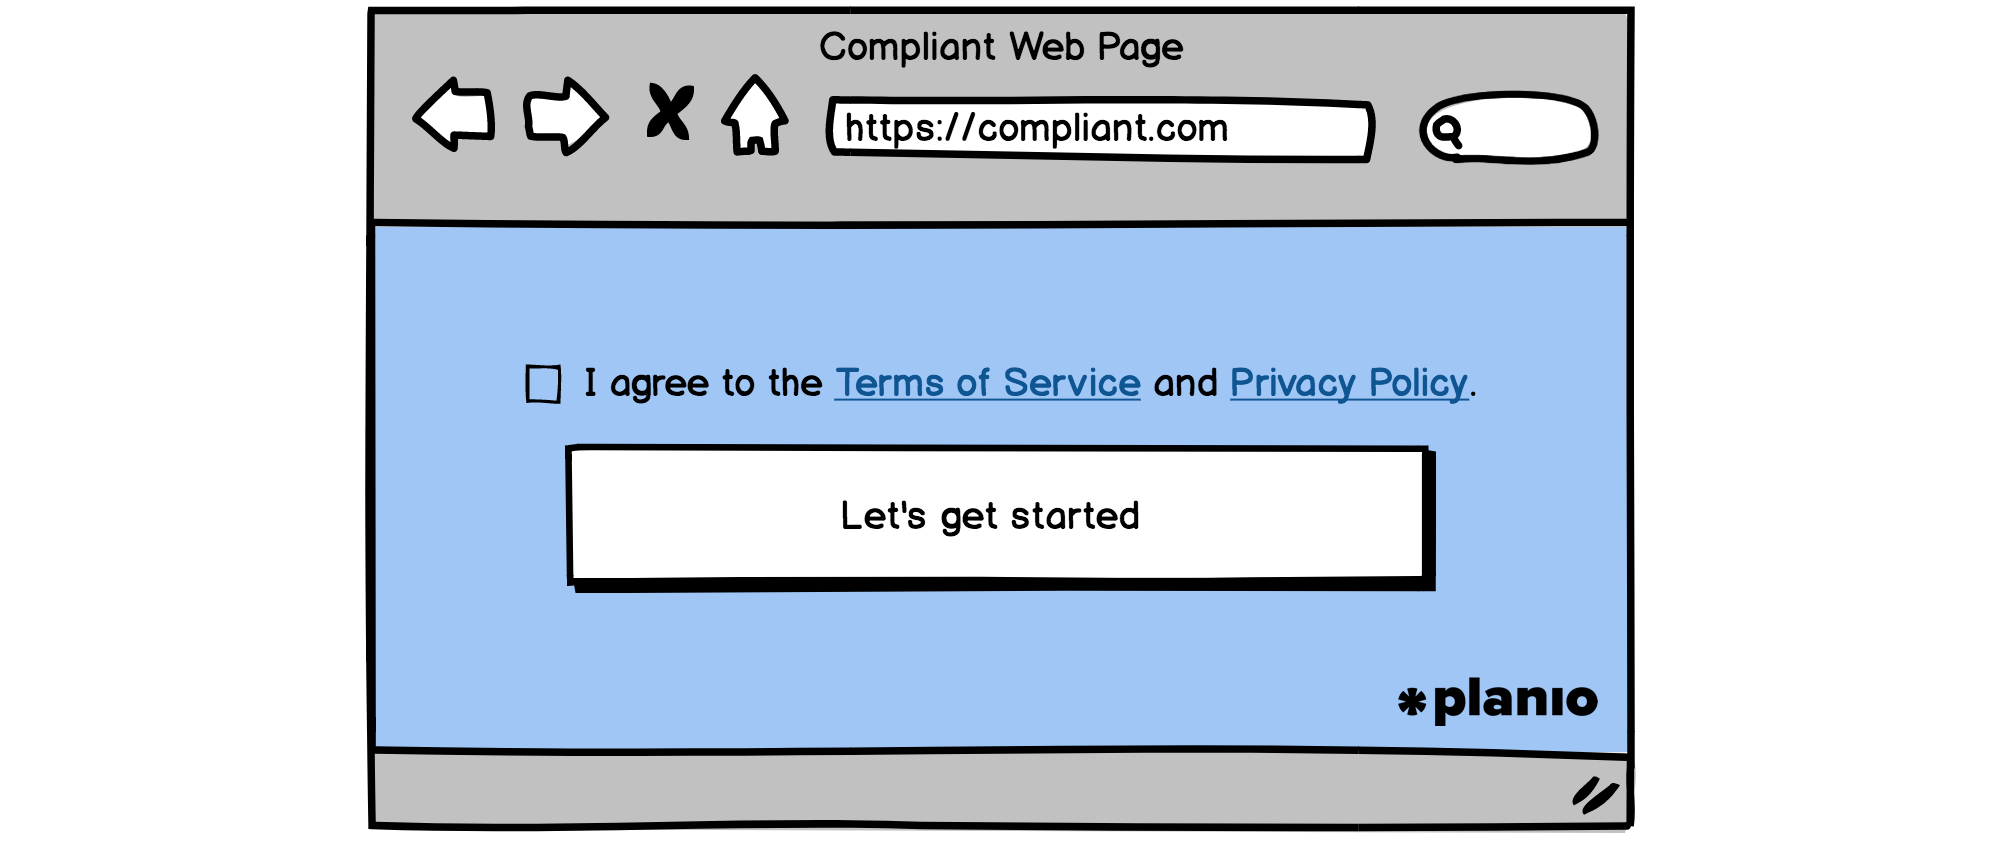 Compliant sign-up form